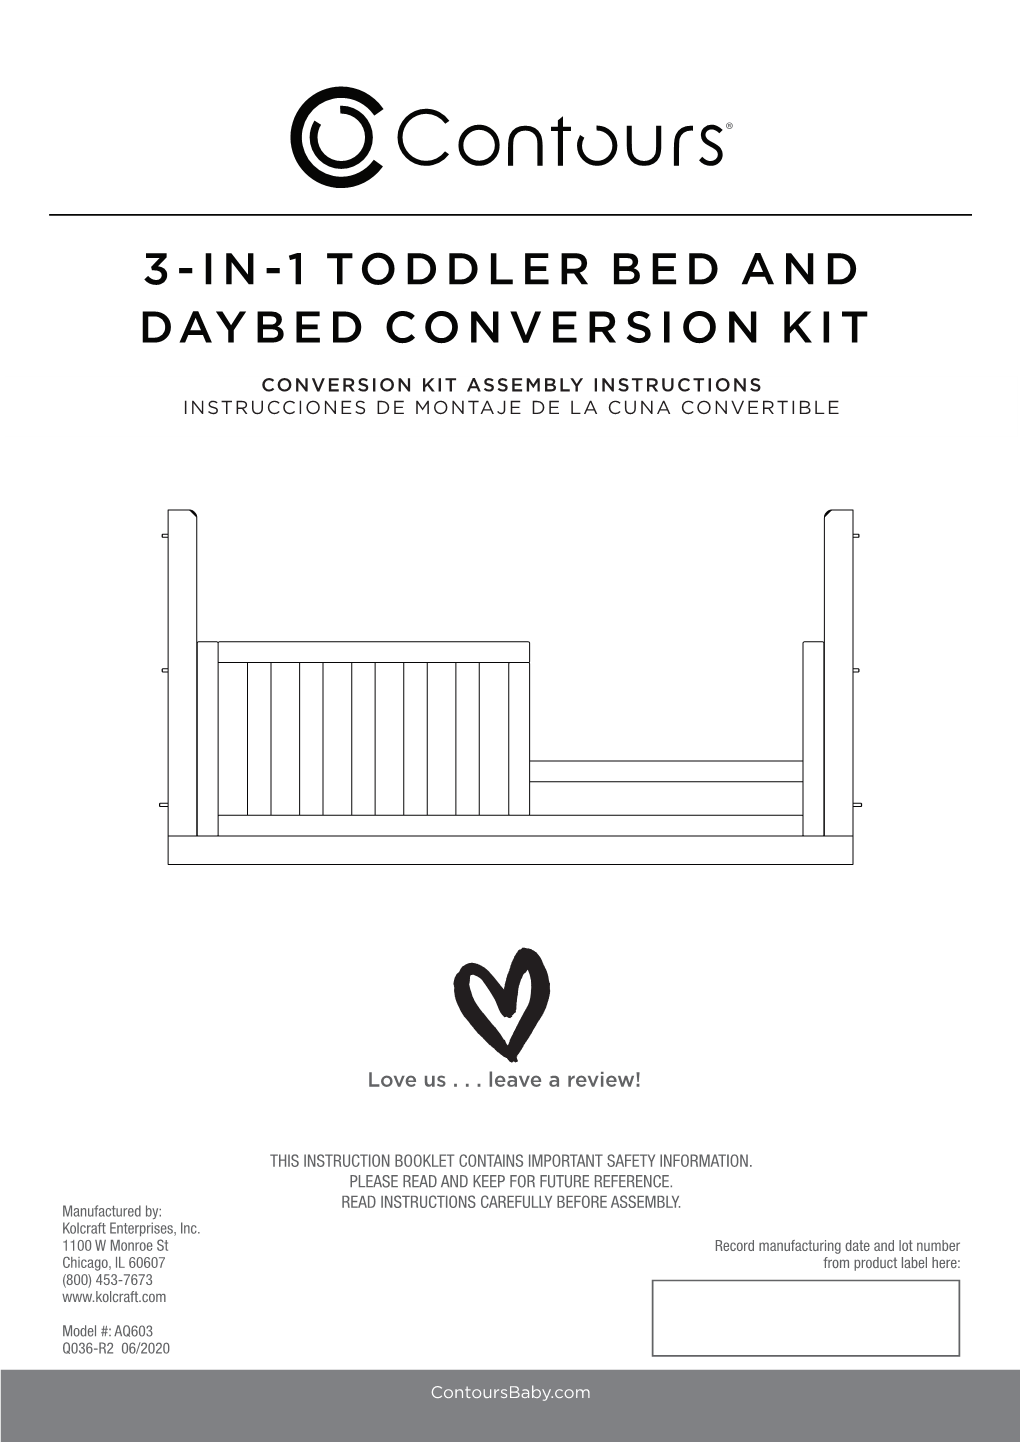 3-In-1 Toddler Bed and Daybed Conversion Kit